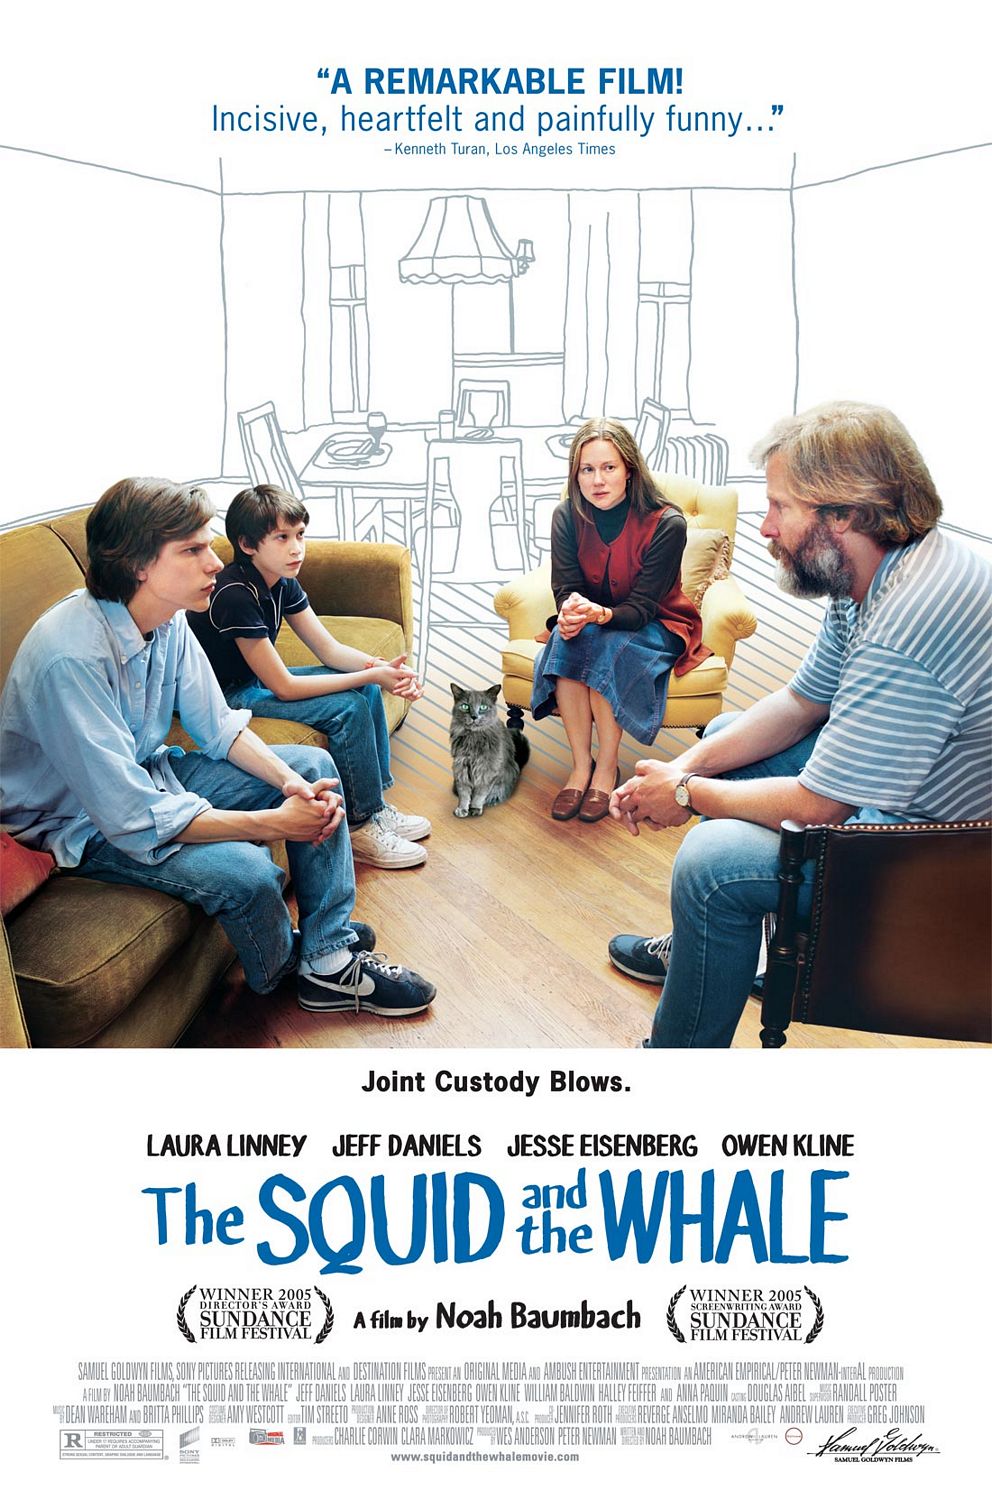 The Squid and the Whale movie poster [Jeff Daniels & Jesse Eisenberg]